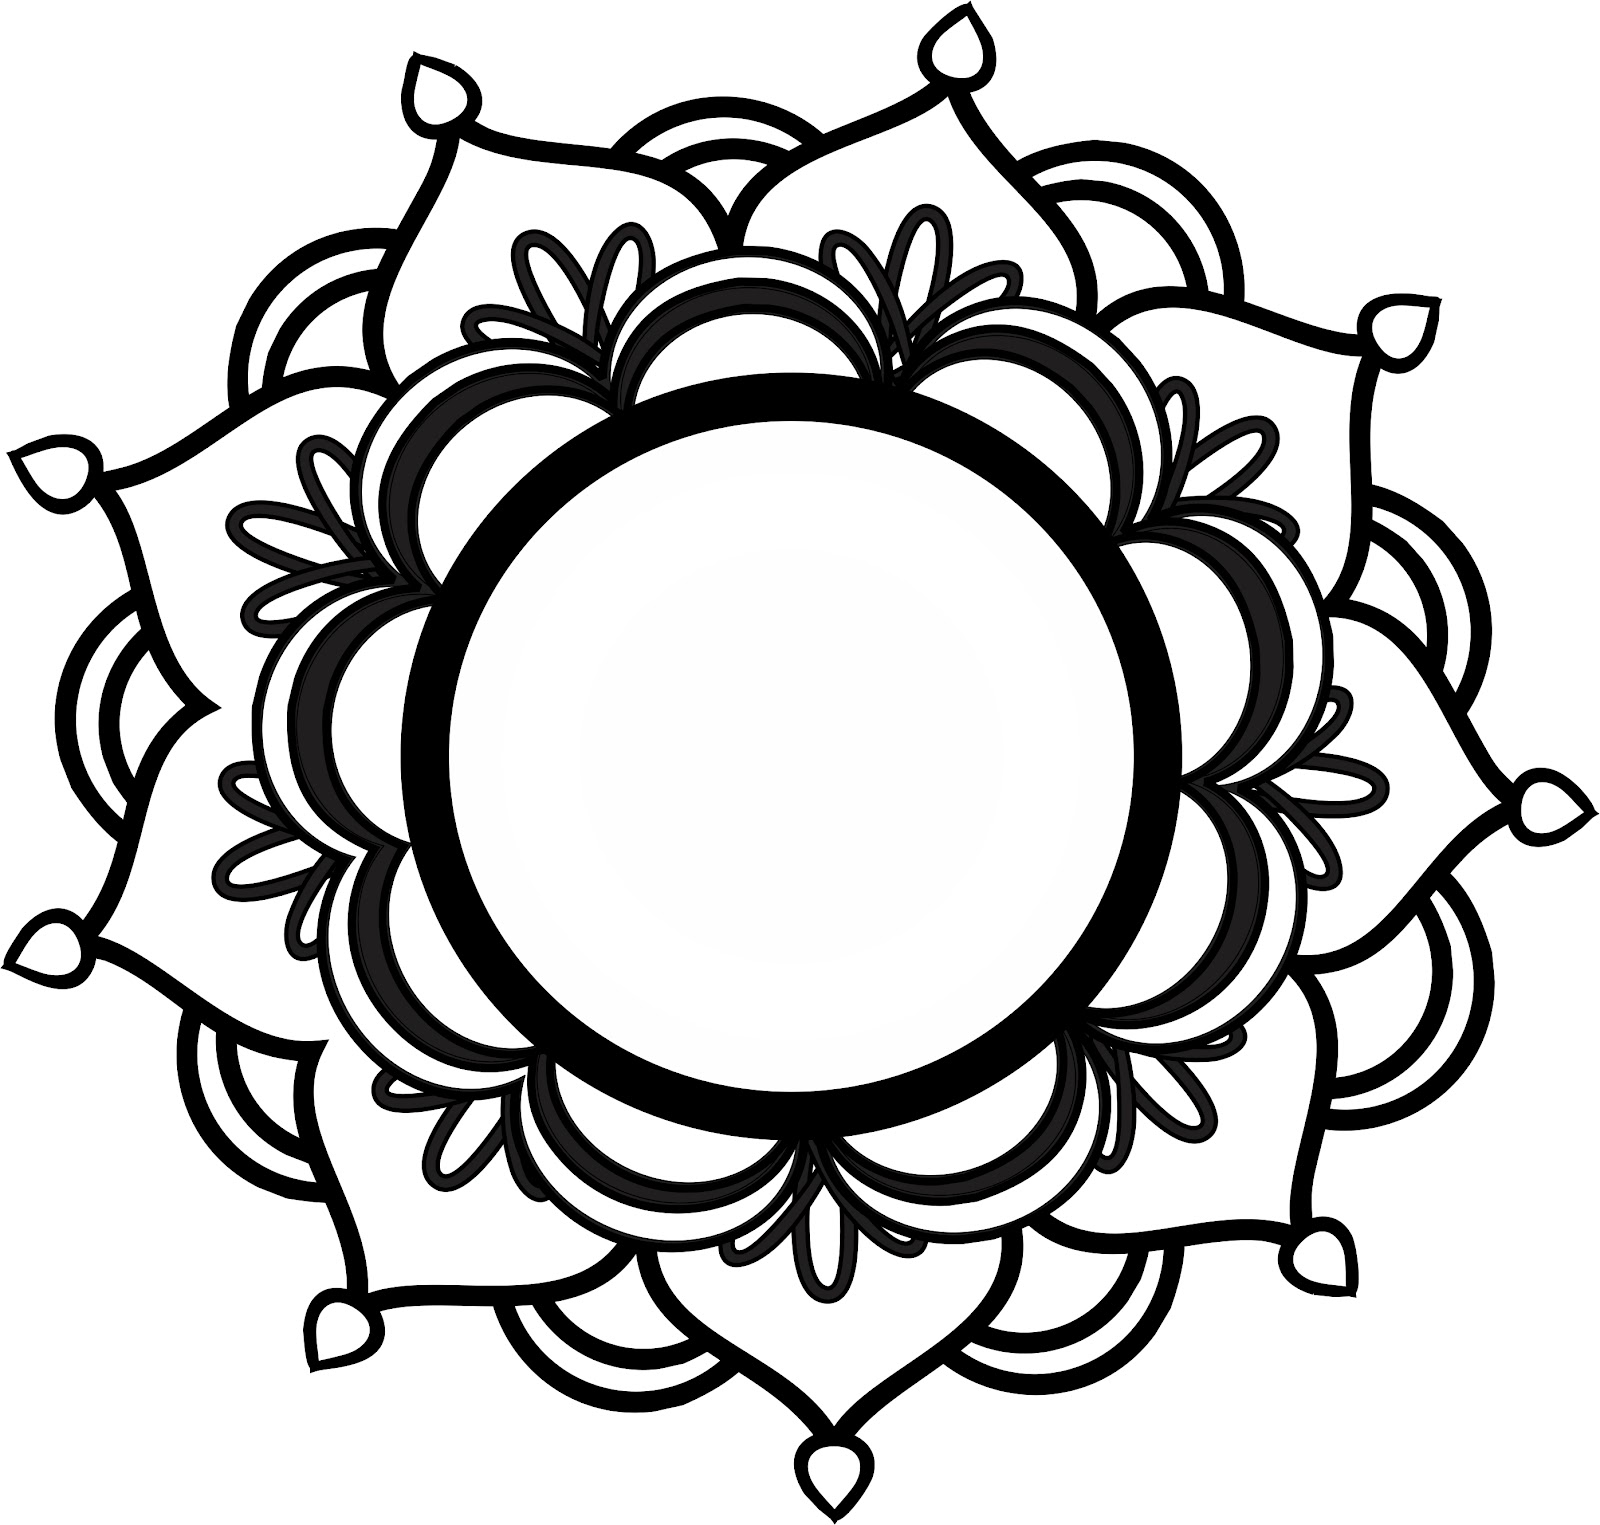 Download Lotus Mandala Outline Pictures | Online Images Collection ...